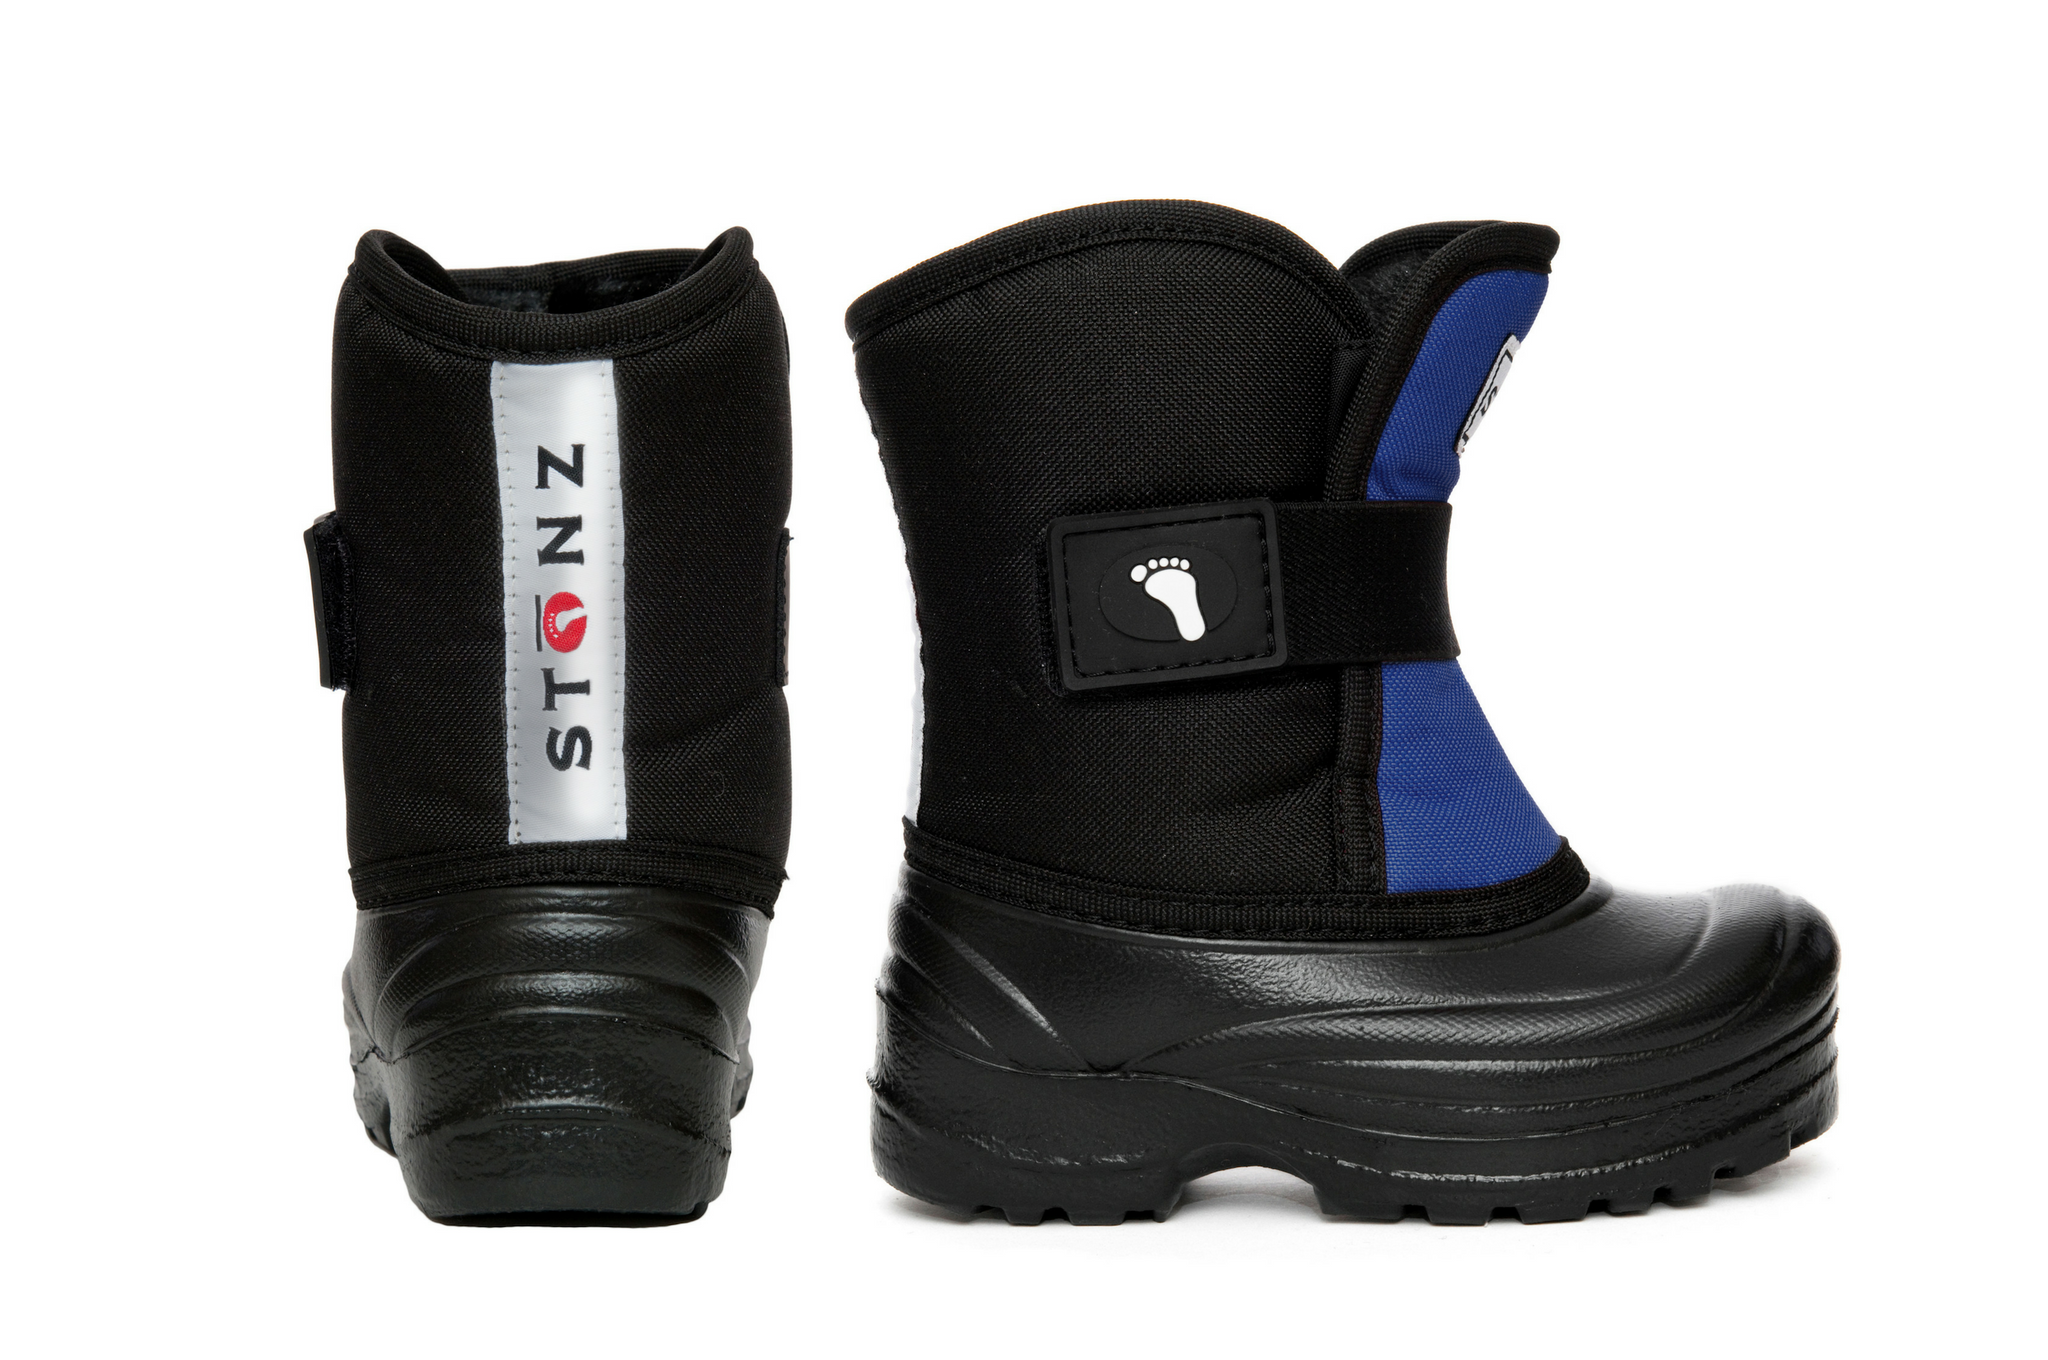 Scout Winter Boots - Stonz Grey/Black Weather-resistant | for - Reflective | Toddlers Shoes